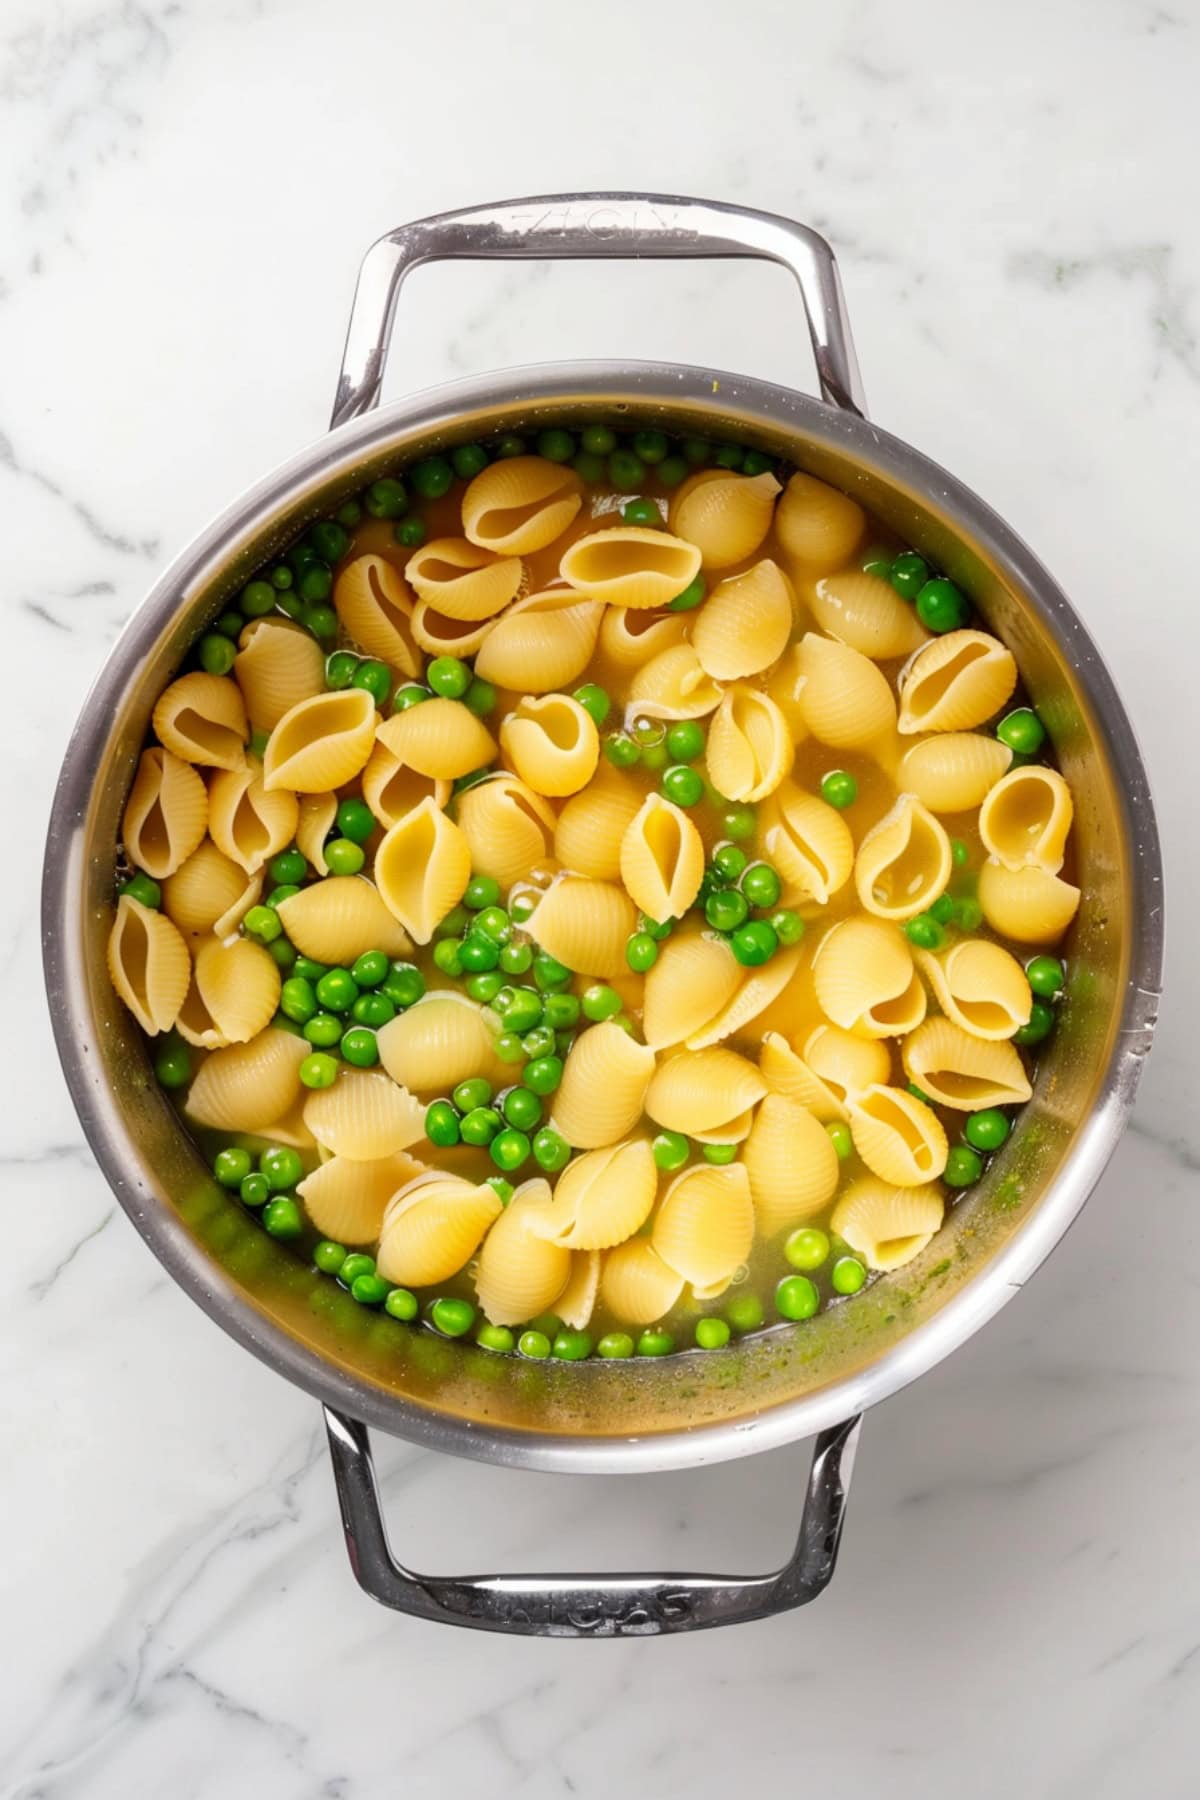 A large pot of boiling water filled with pasta shells and green peas.